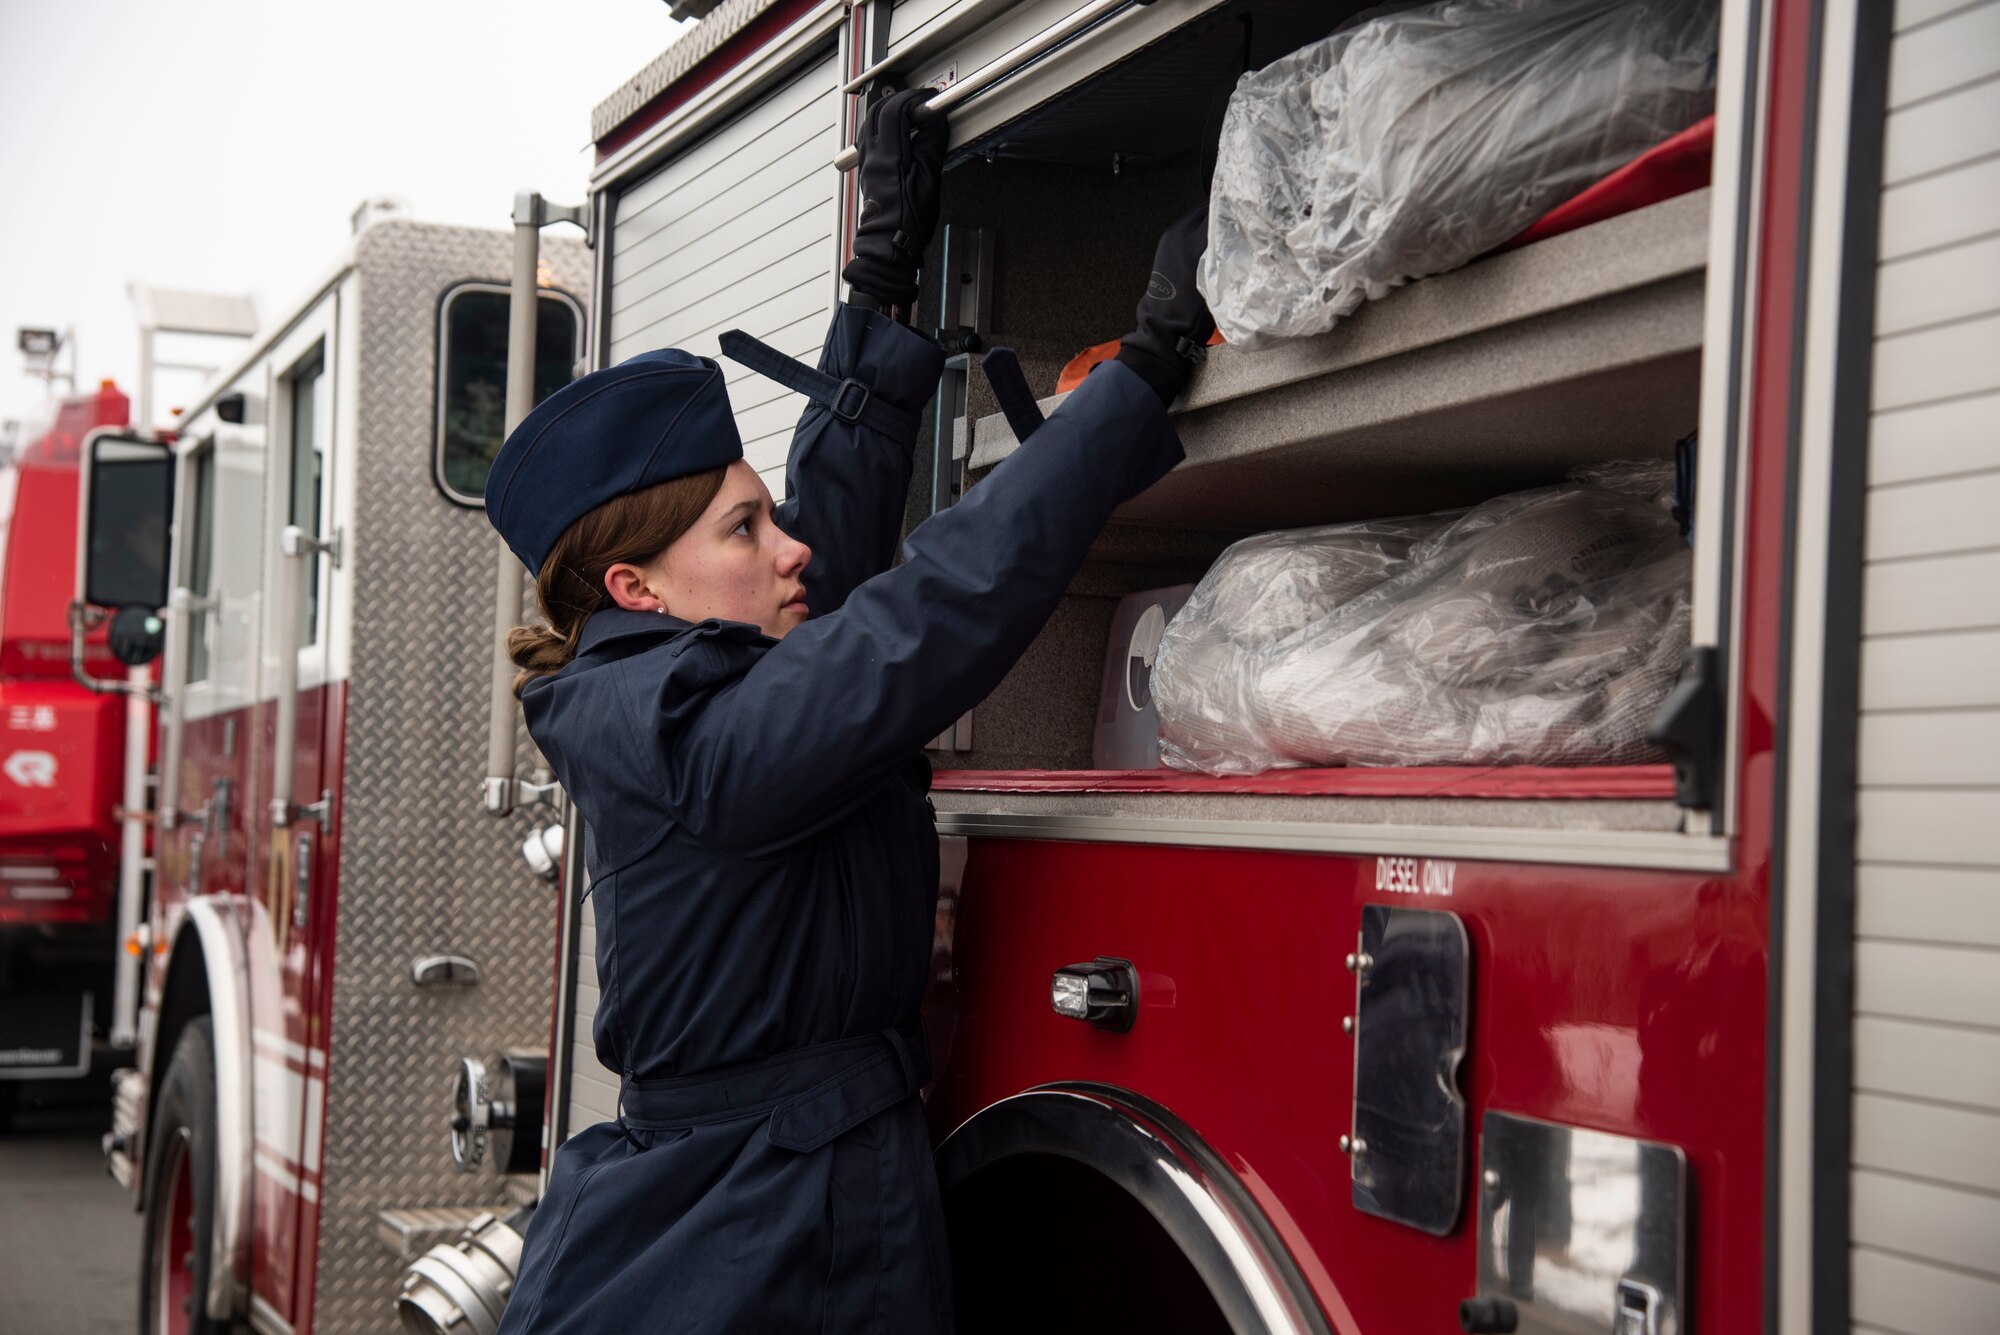 U.S. Air Force Airman 1st Class Yuki Lubbers, a 35th Civil Engineer Squadron firefighter closes a hatch on a fire truck during the annual Misawa City Fire Department New Year ceremony at Misawa City, Japan, Jan. 20, 2019. Along with the Misawa City fire department units, the 35th CES showcased their response times to emergencies. After the demonstration, first responders paraded around the block to say hello to locals. (U.S. Air Force photo by Senior Airman Sadie Colbert)